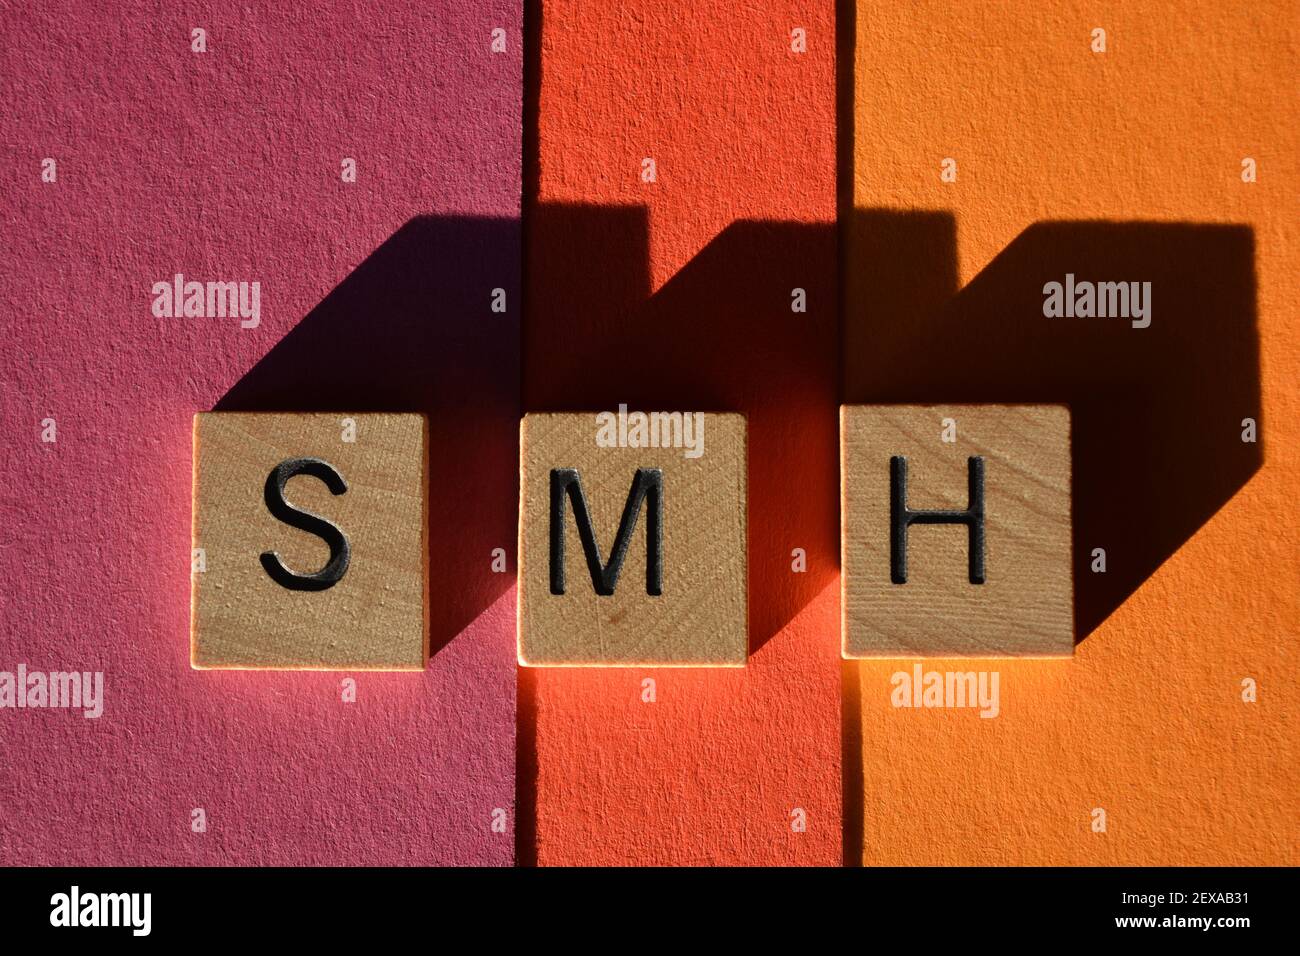 Internet Slang Acronyms Brb Be Right Stock Photo 1414053476